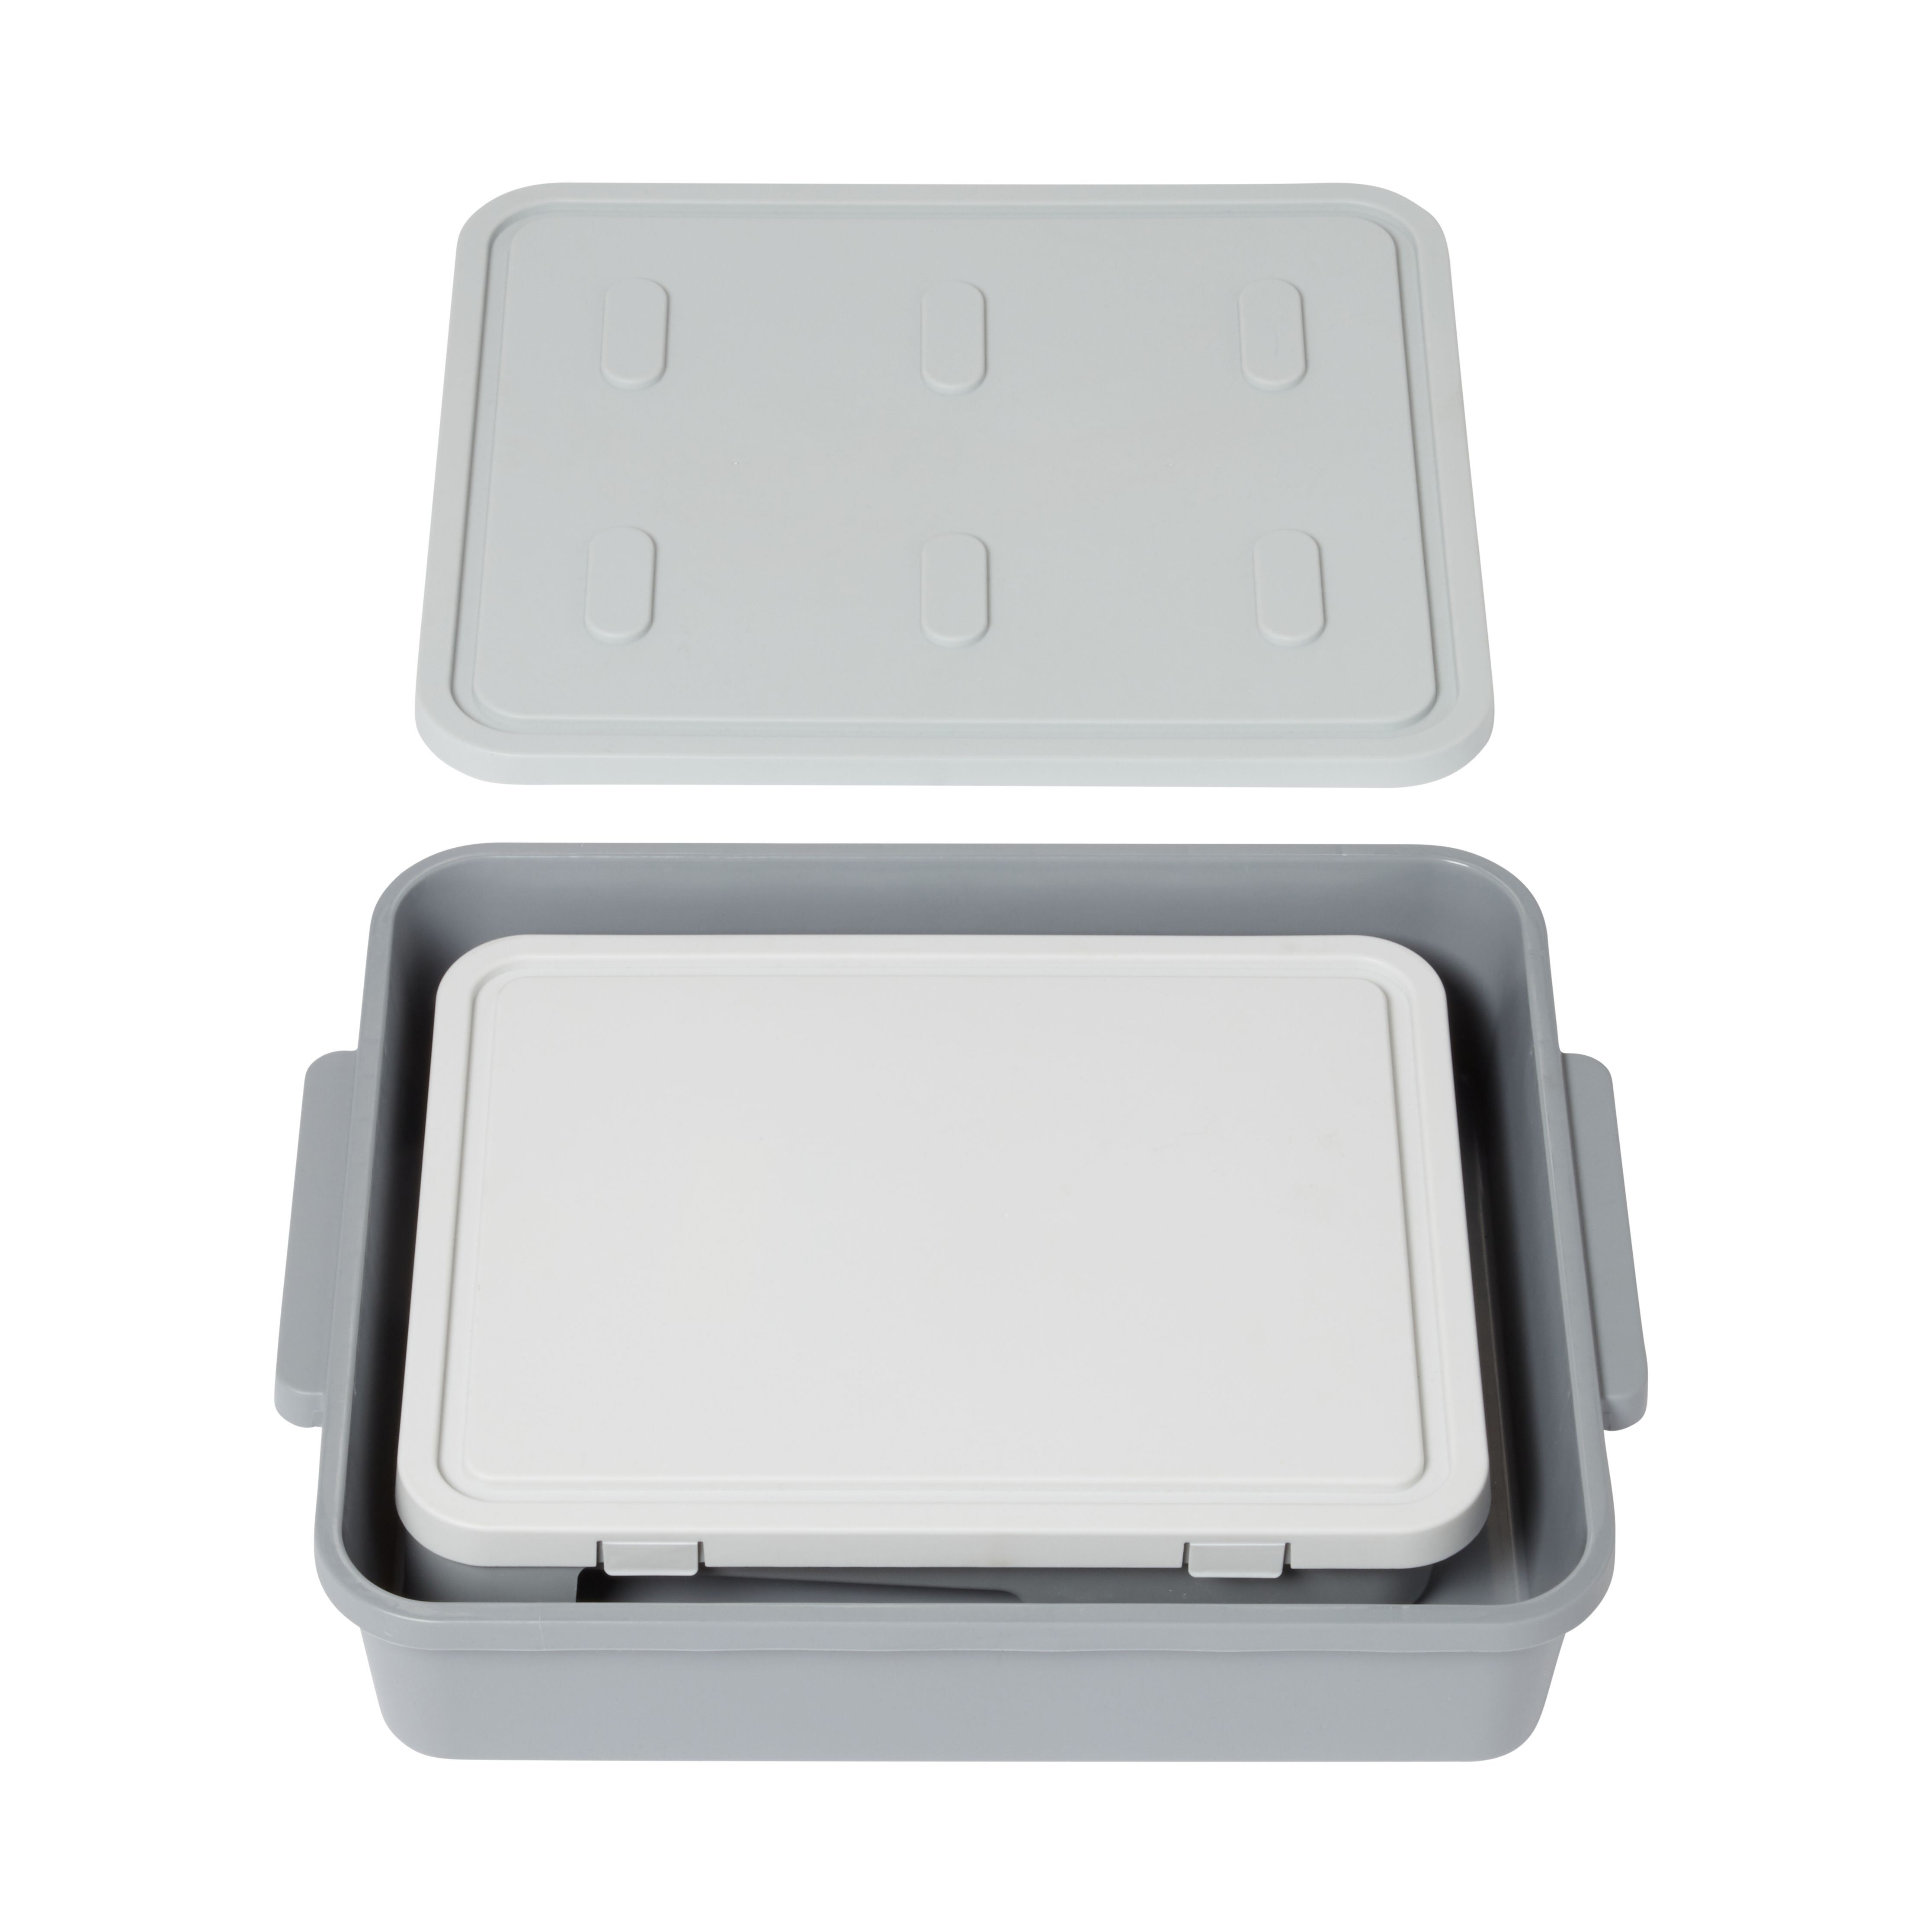 GoodHome 7 Roller tray